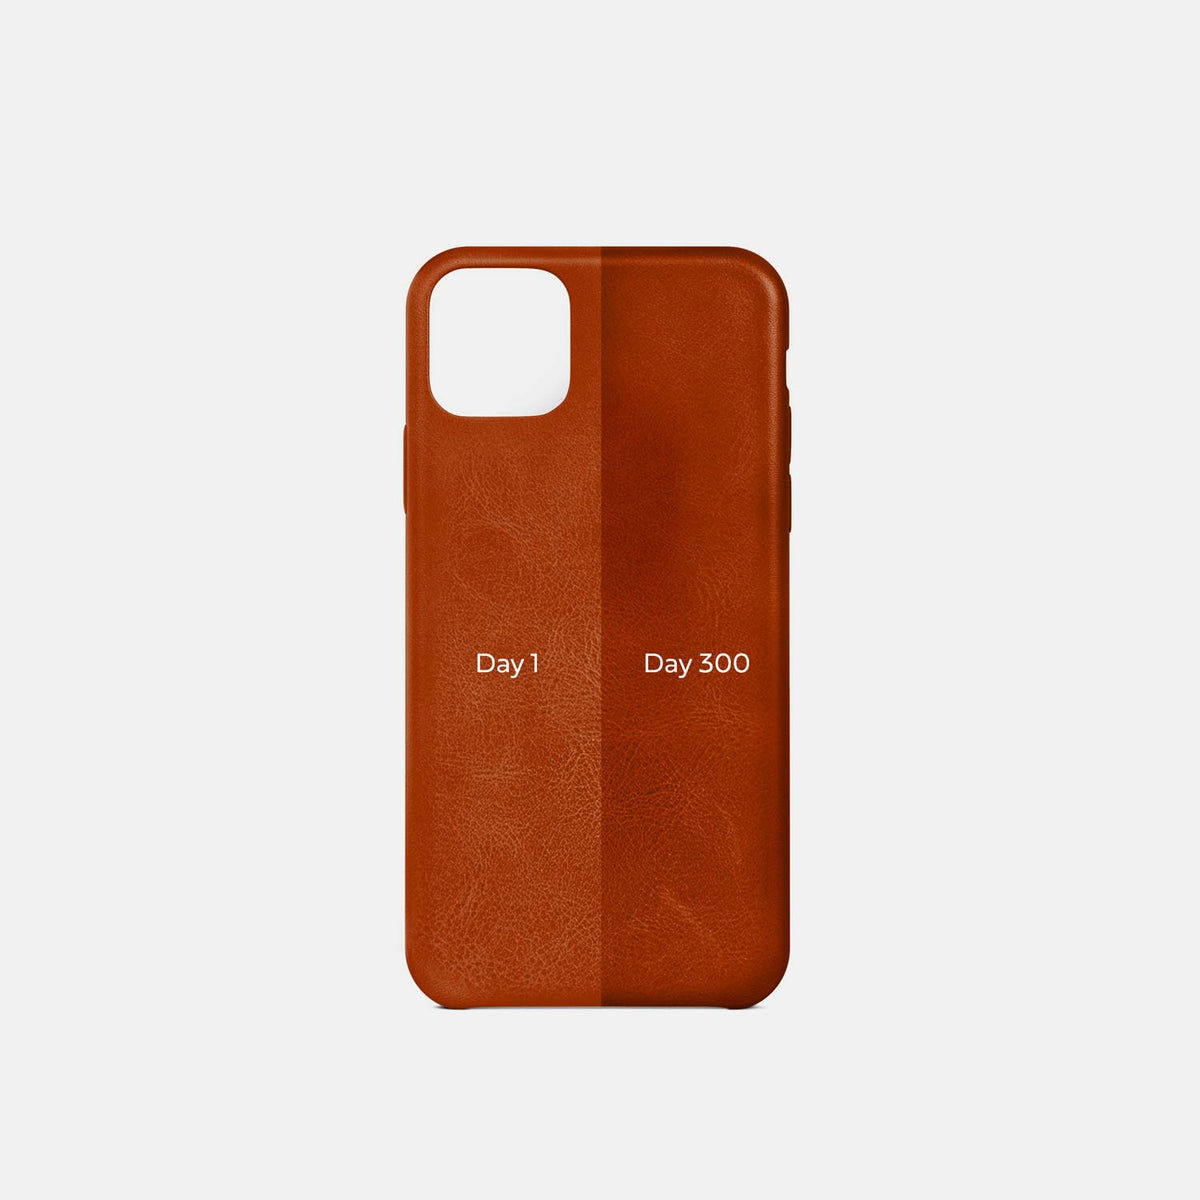 Leather iPhone 12 Shell Case - Saddle Brown - RYAN London